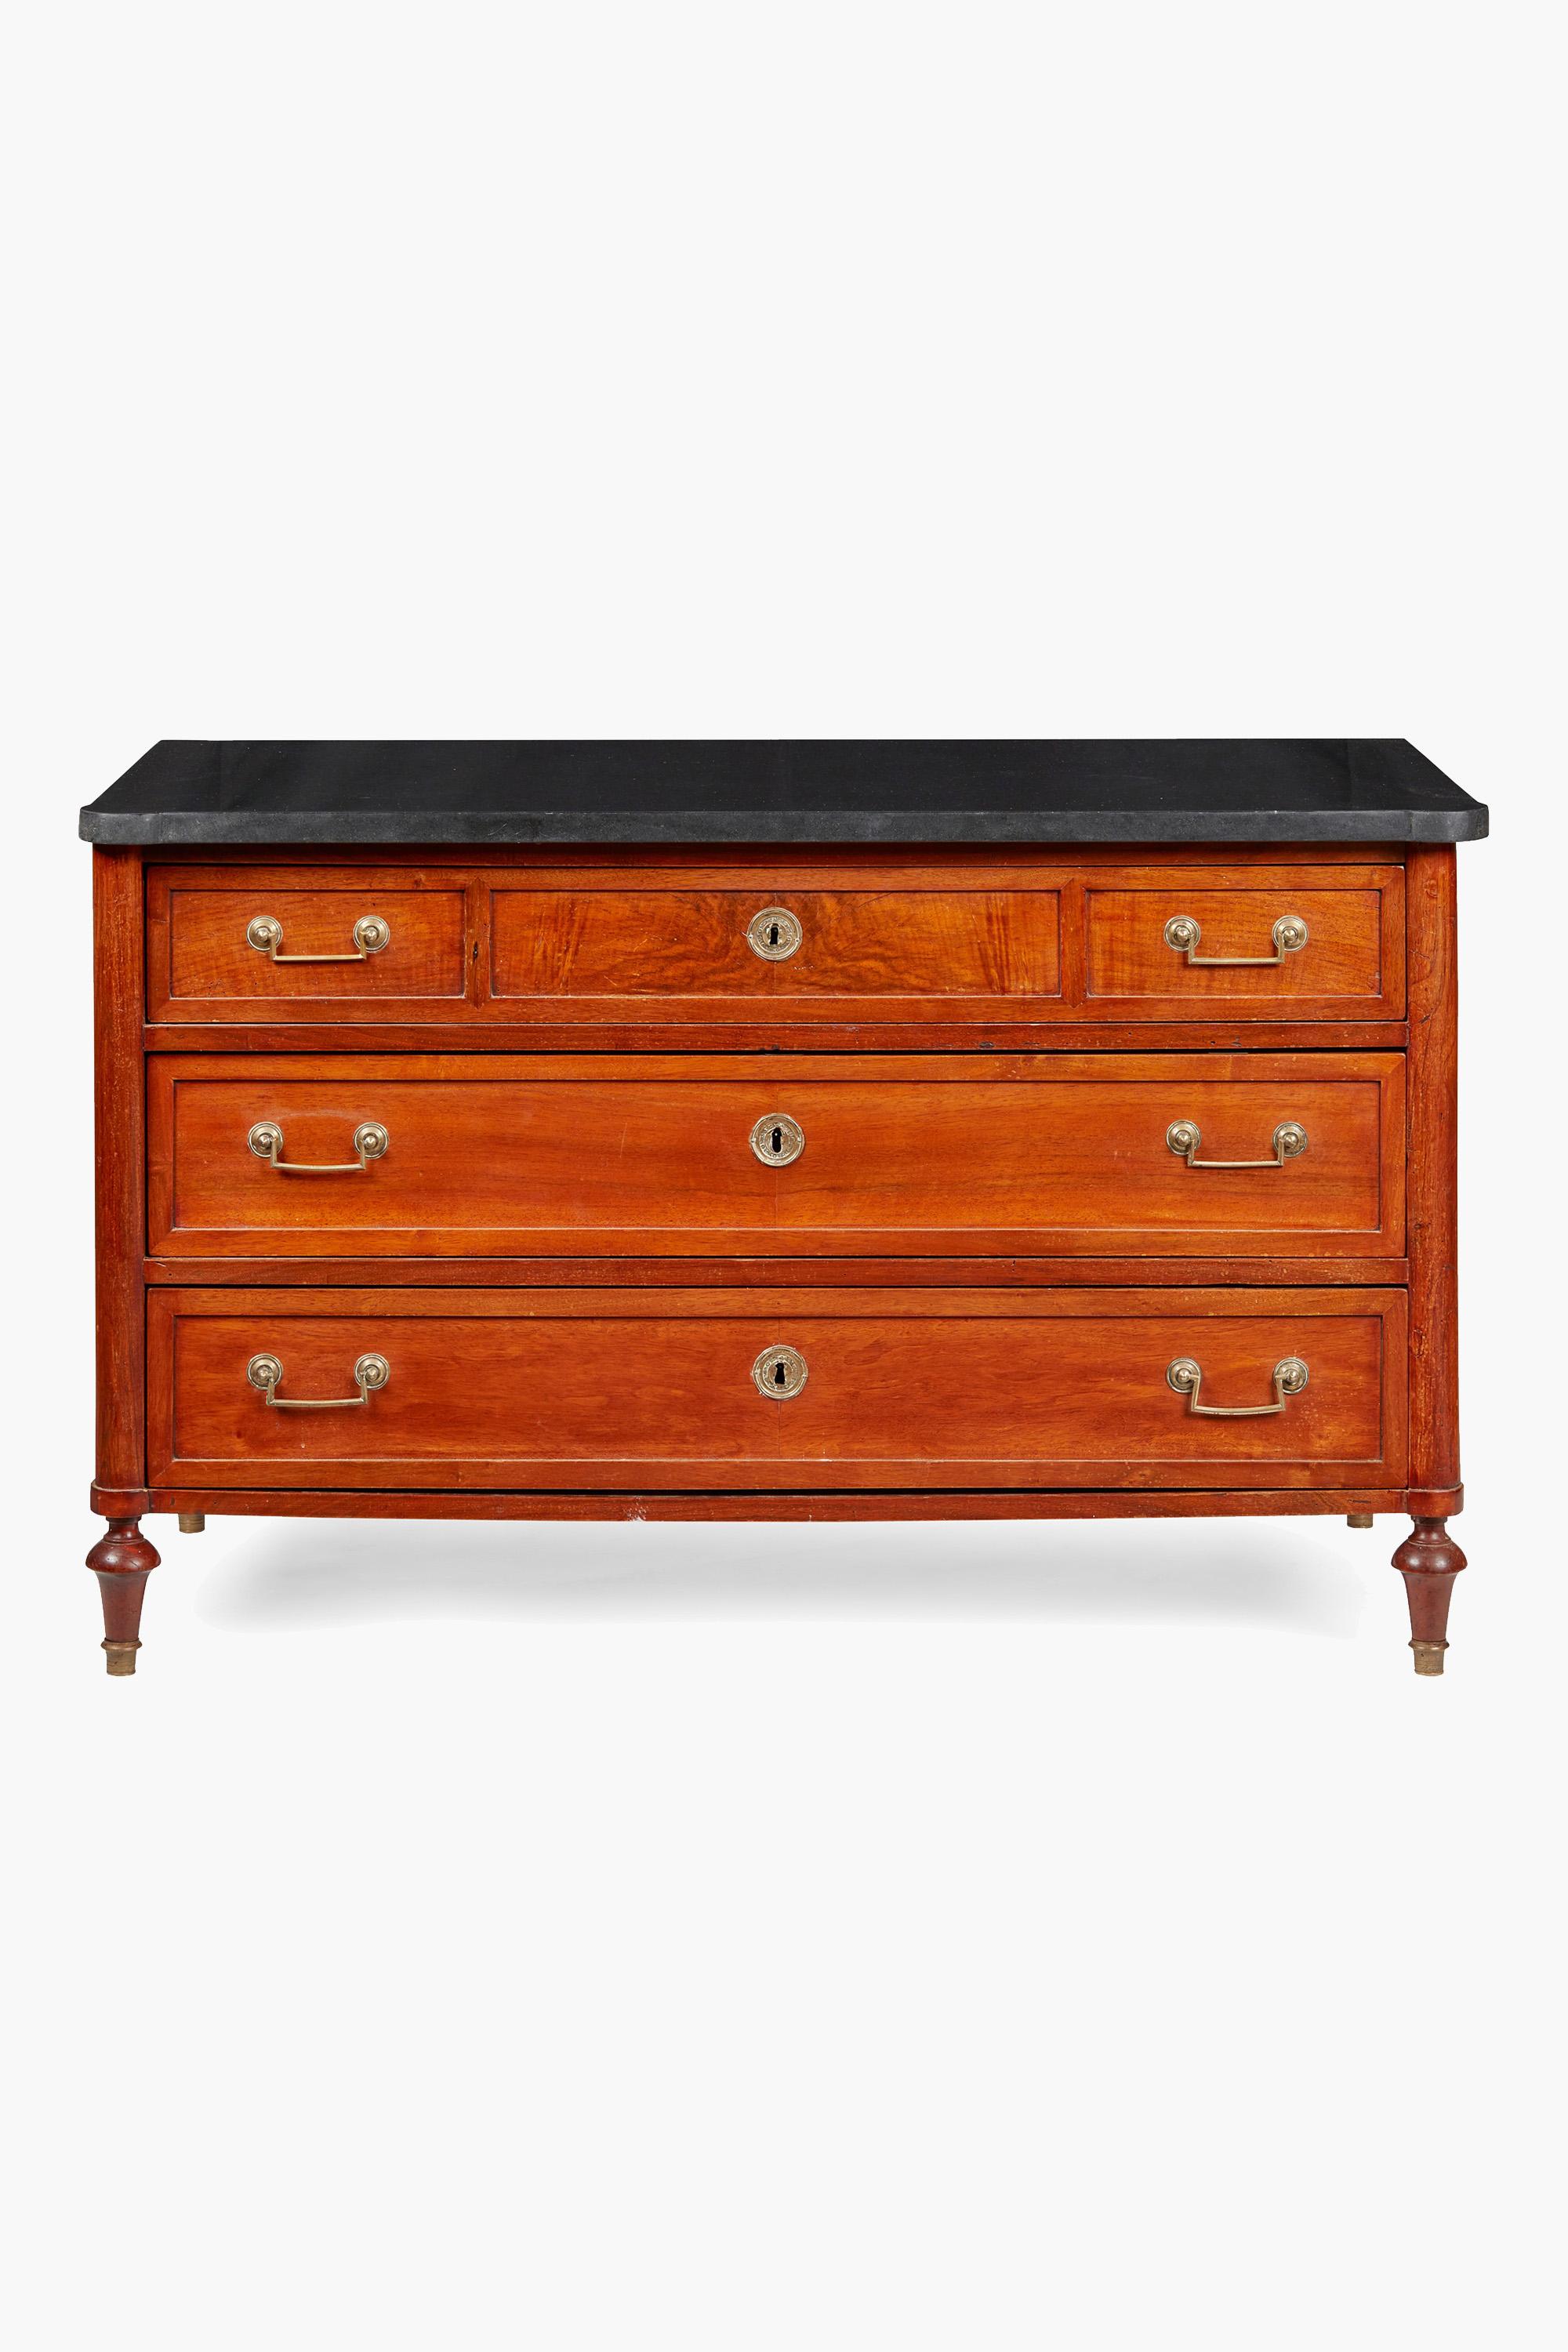 Italian fruitwood commode, Late 18th Century

Italian Neoclassical fruitwood commode with a black marble top, detailed with outset rounded corners above three long drawers flanked by pillars, raised on turned feet with brass sabot